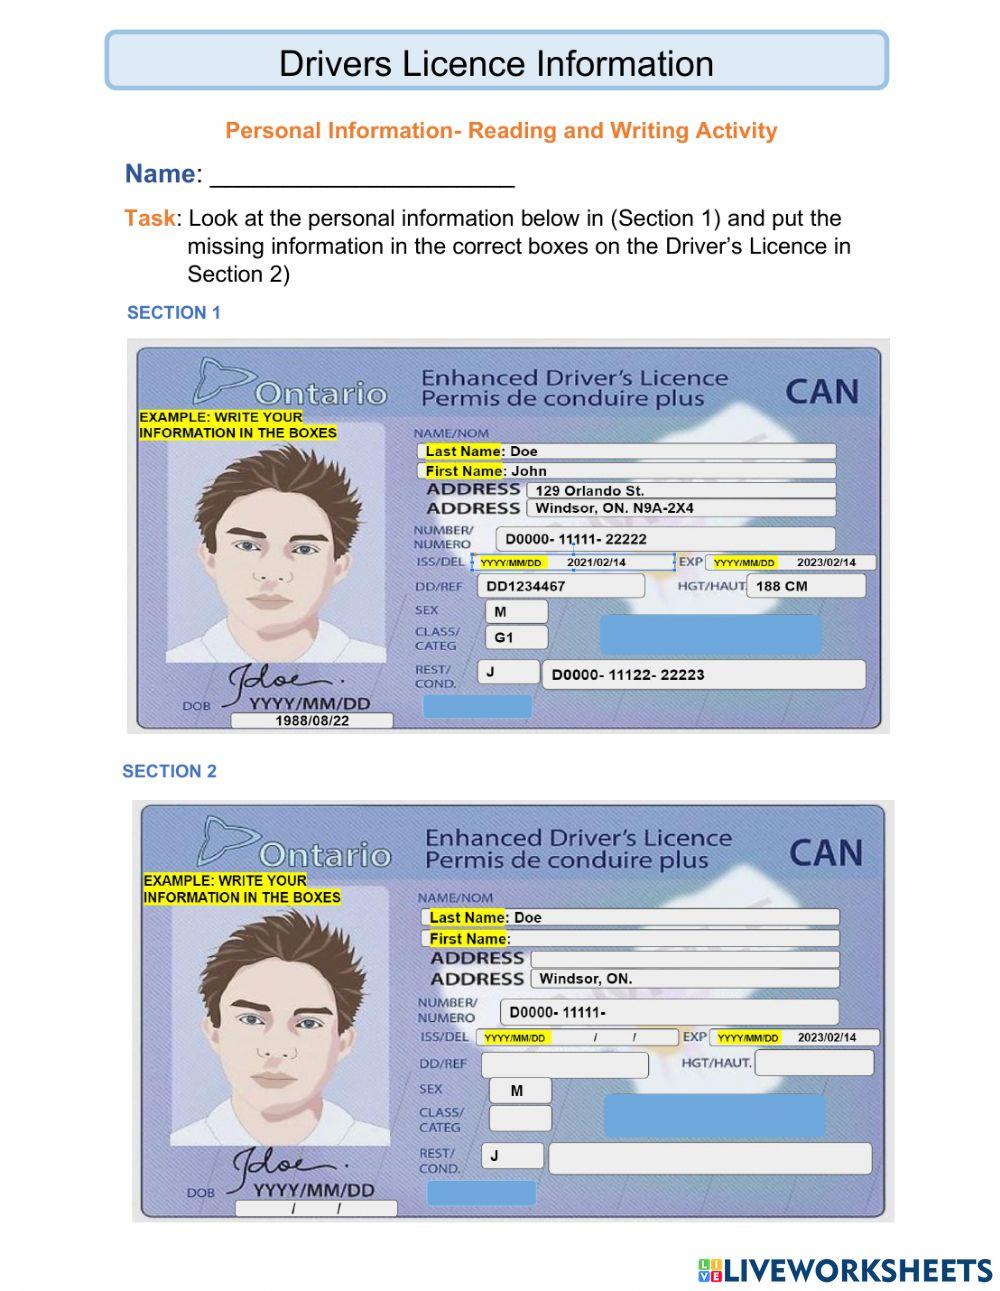 Personal Information Filling out a Driver's Licence